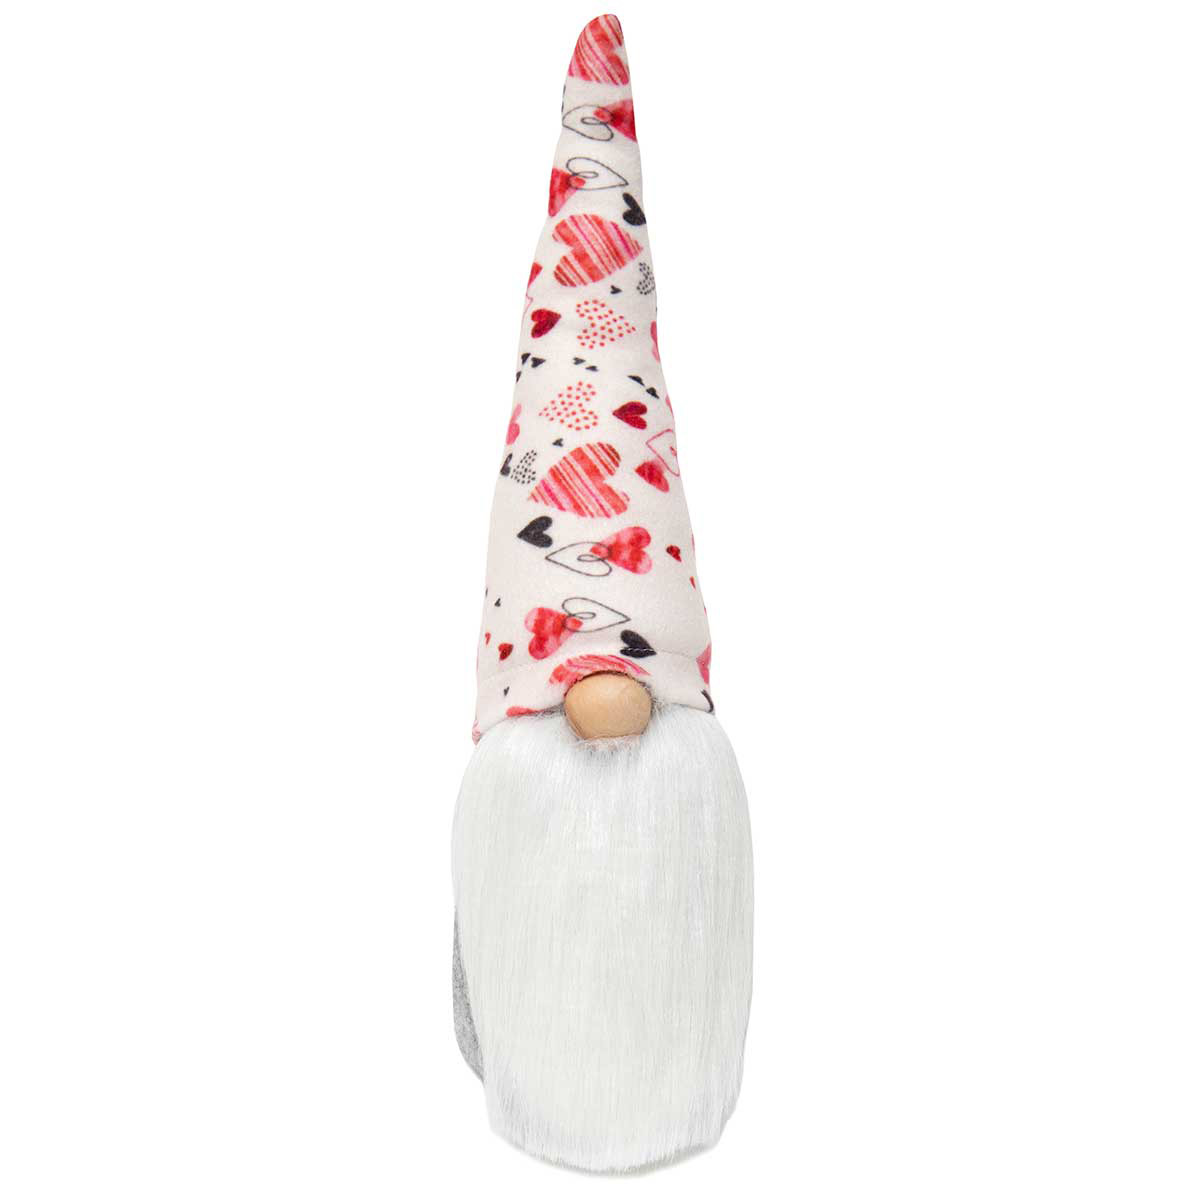 b50 Sir Heartsalot Gnome with Wood Nose 13.5"